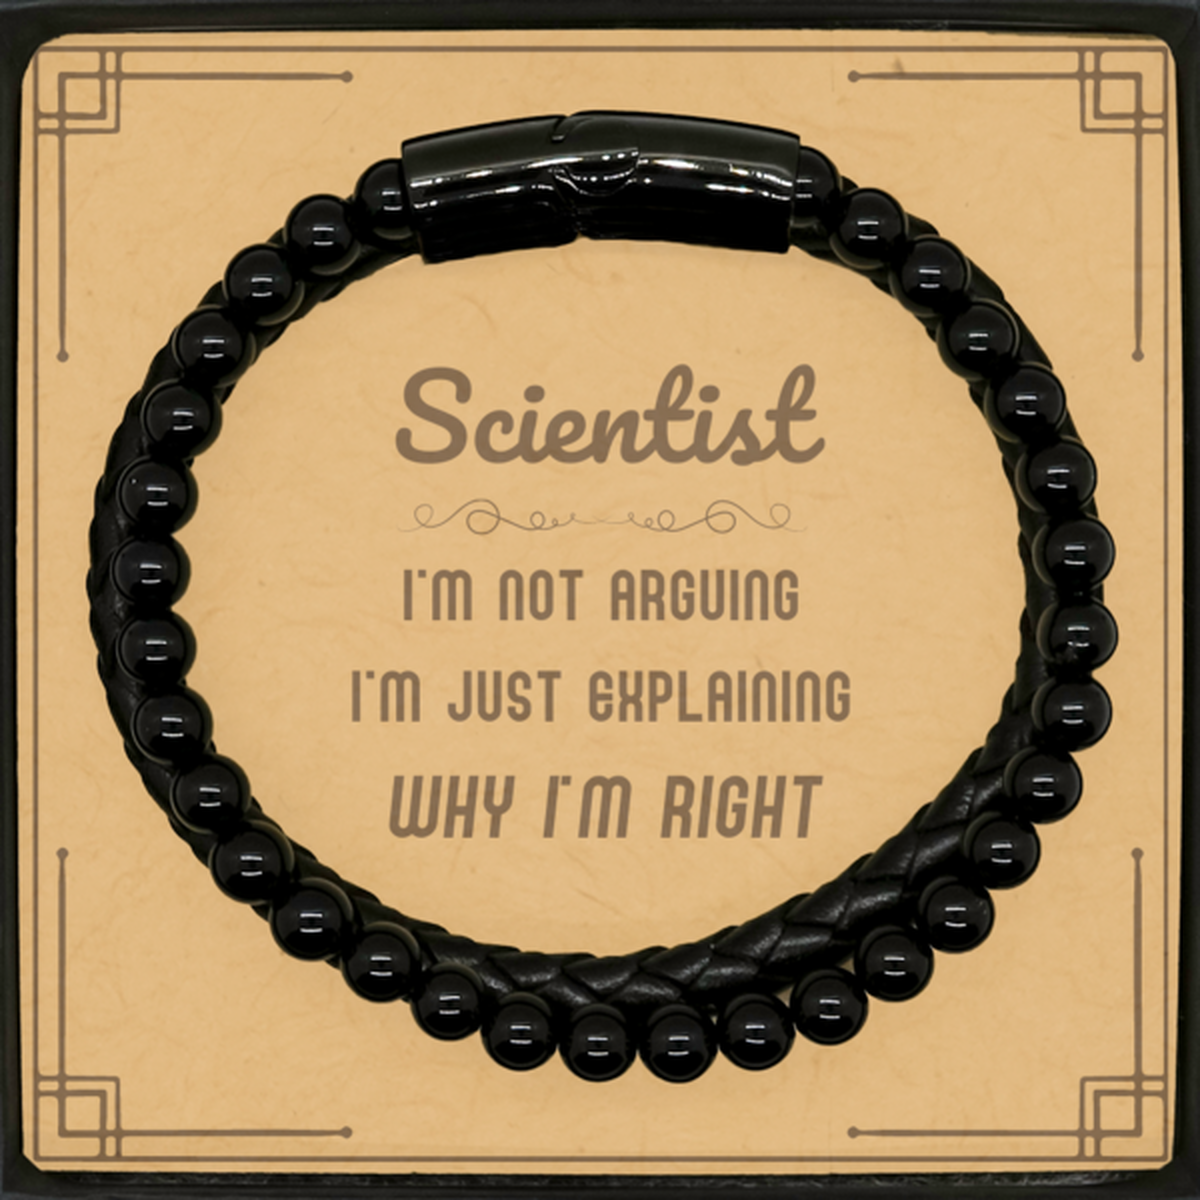 Scientist I'm not Arguing. I'm Just Explaining Why I'm RIGHT Stone Leather Bracelets, Funny Saying Quote Scientist Gifts For Scientist Message Card Graduation Birthday Christmas Gifts for Men Women Coworker